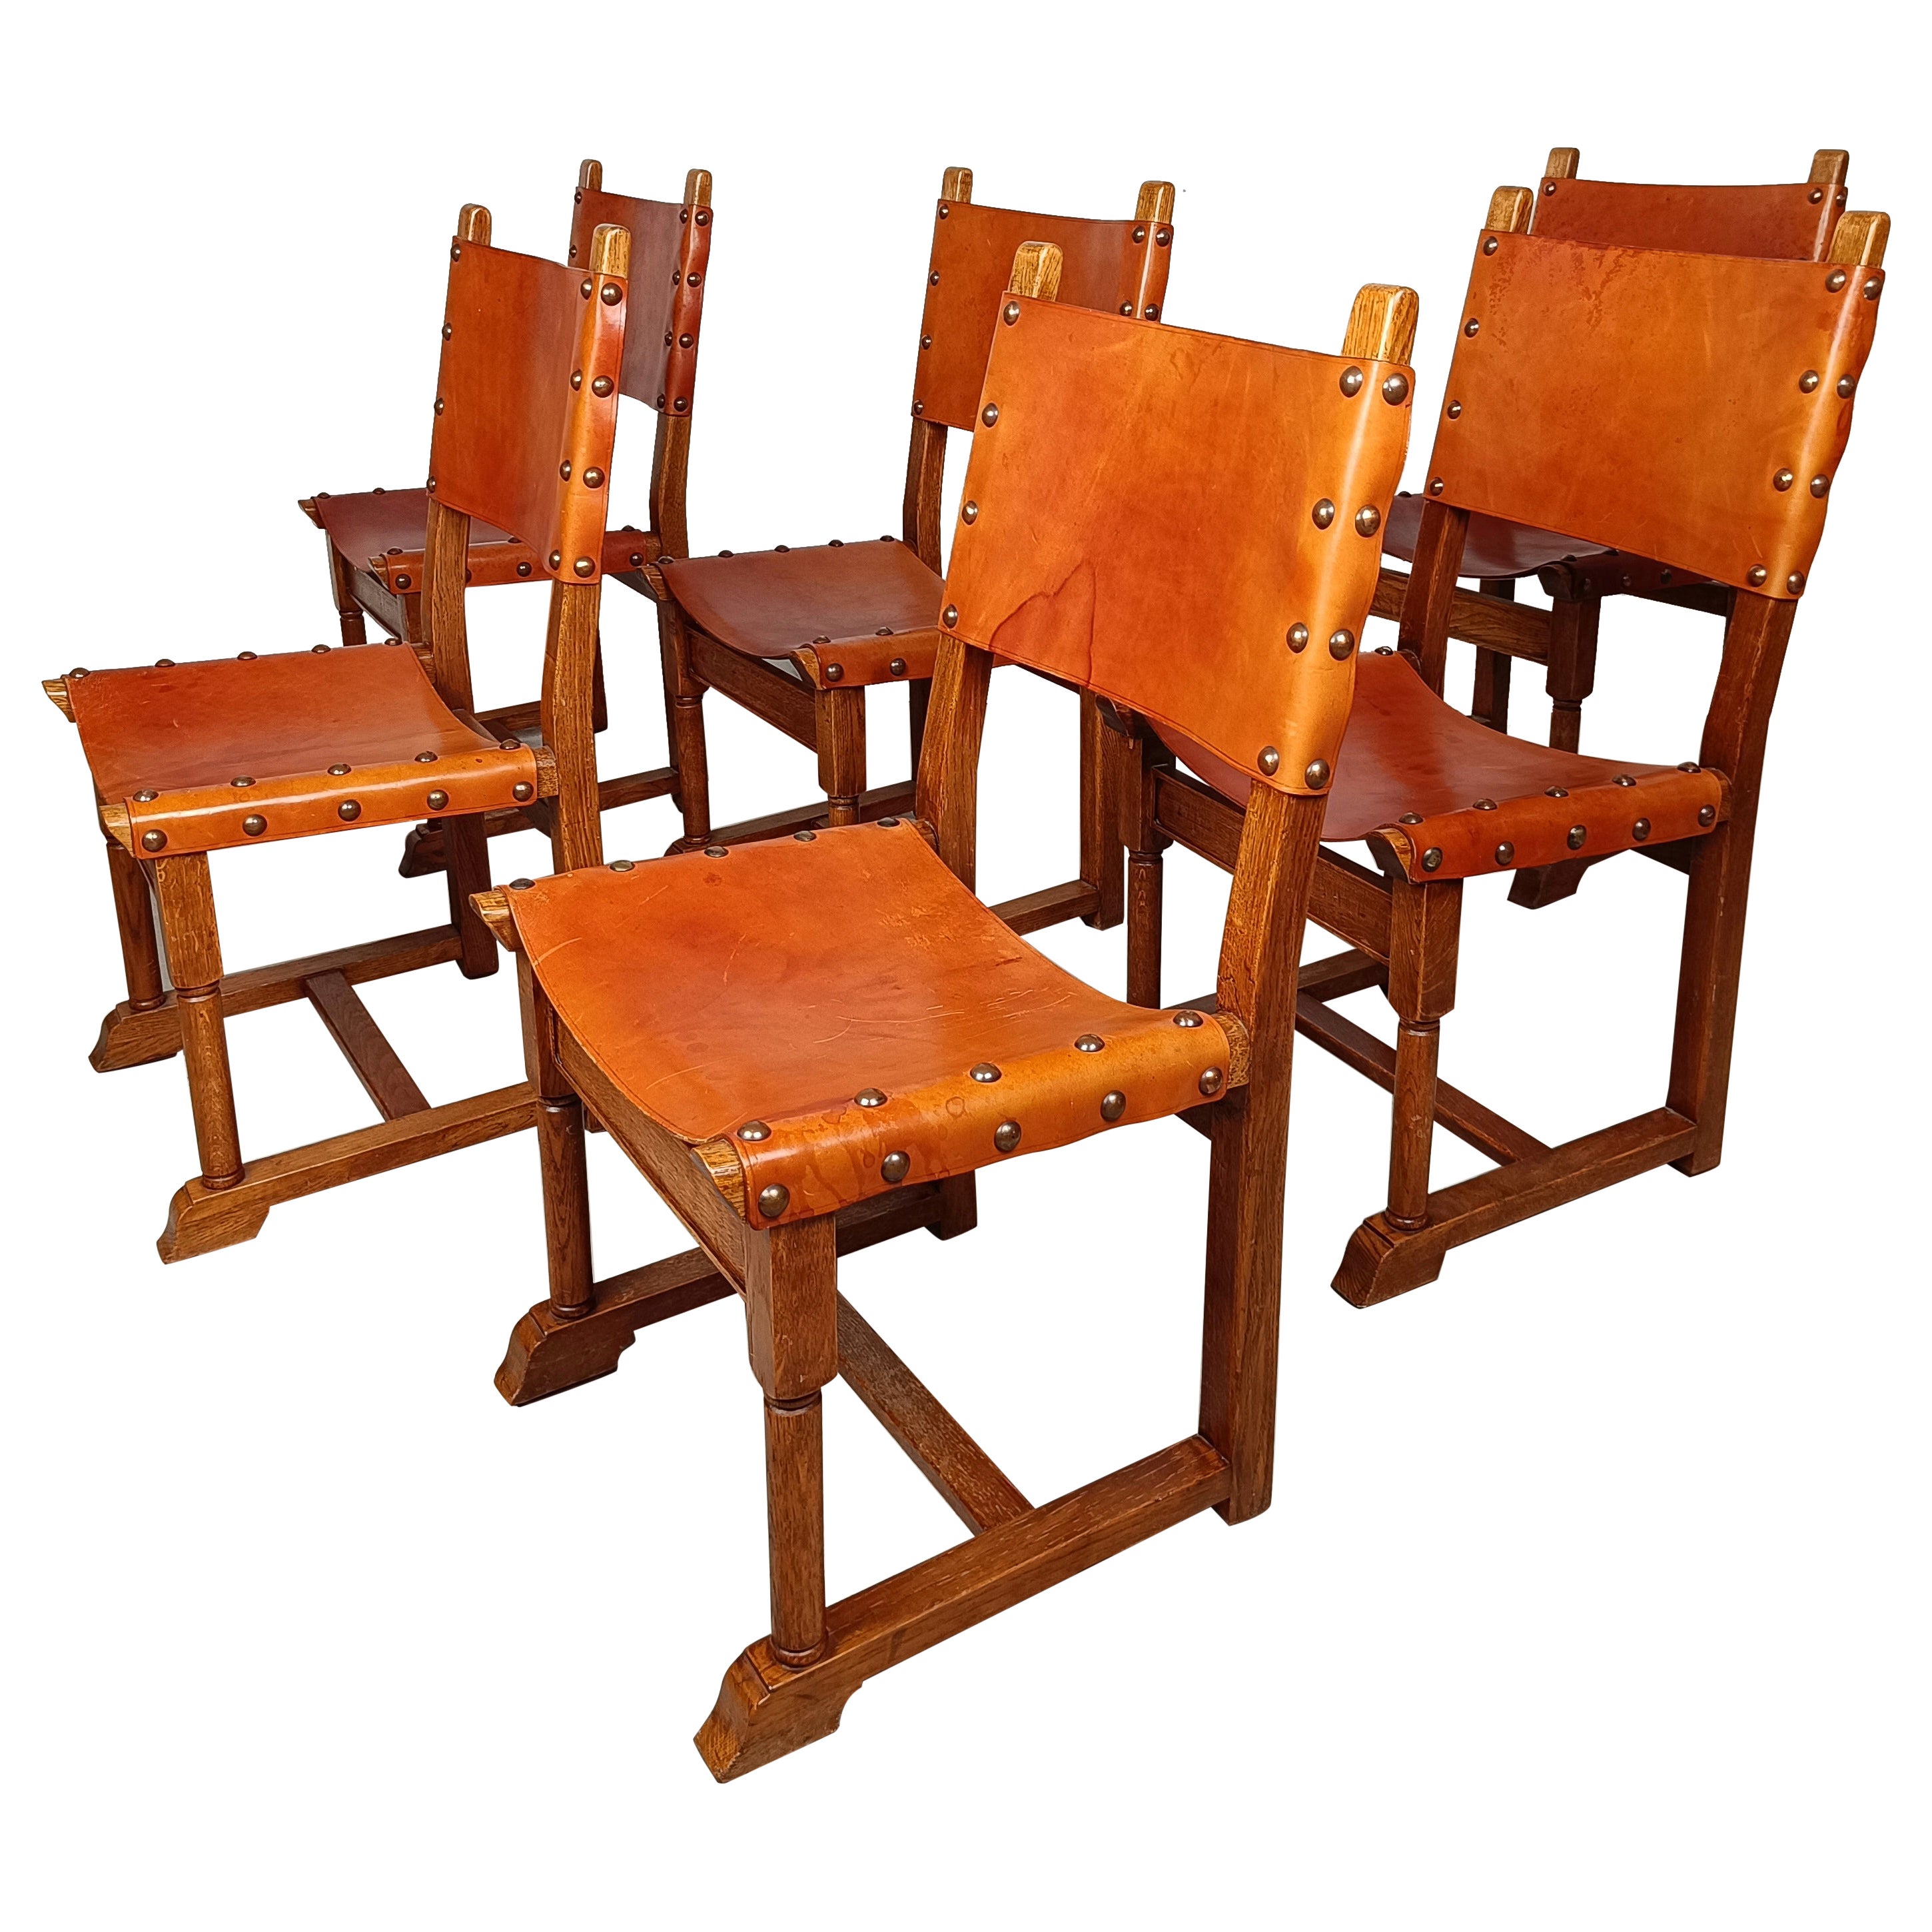 Set of Six Rustic Italian Chairs in Cognac Studded Leather and solid Oak Wood  For Sale